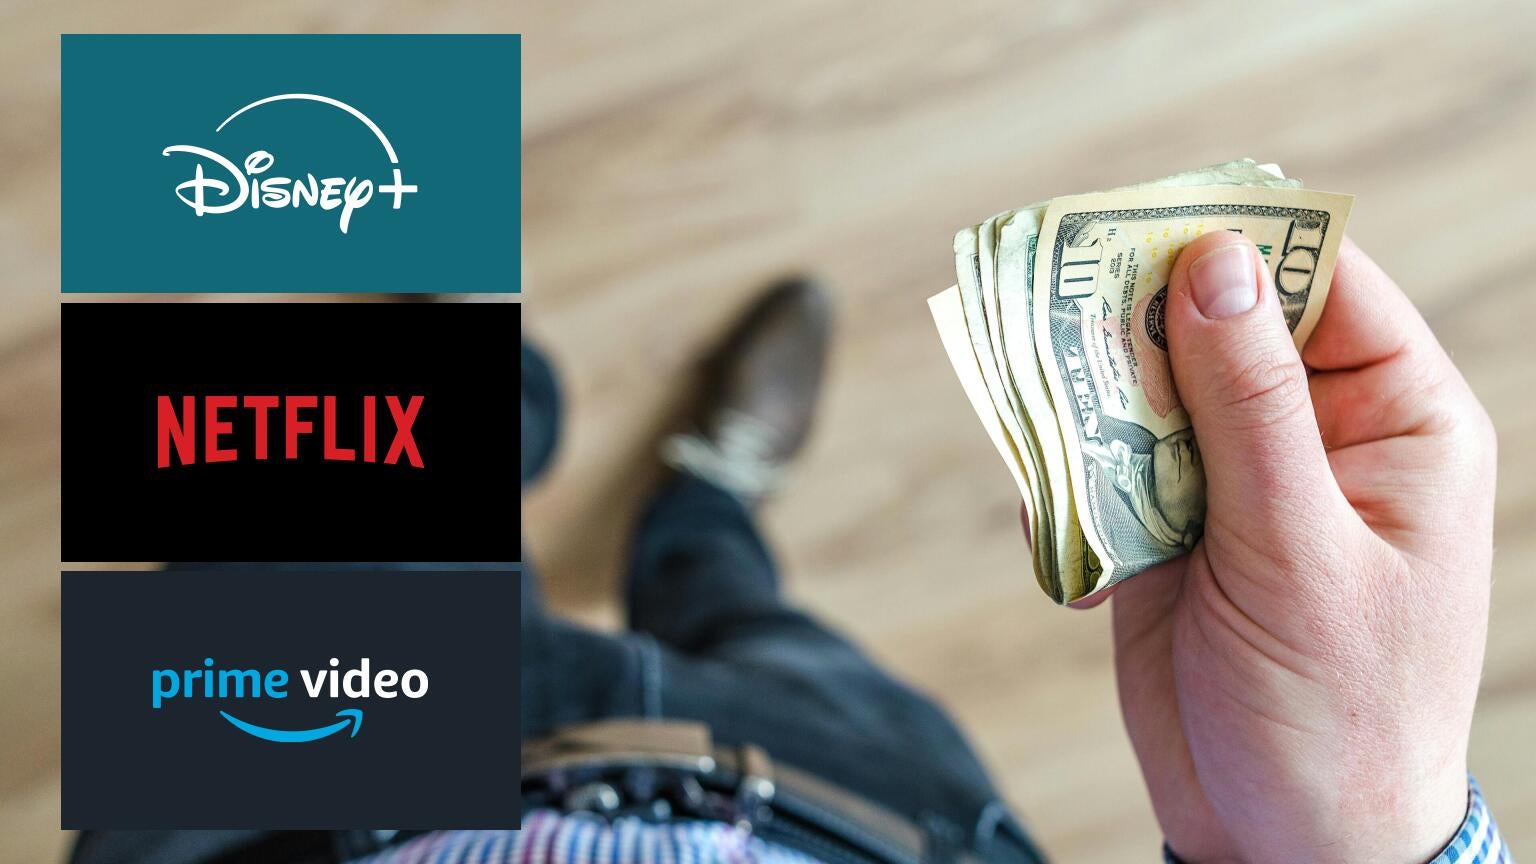 New data shows that viewers are indeed curtailing their spending habits as streaming prices rise.